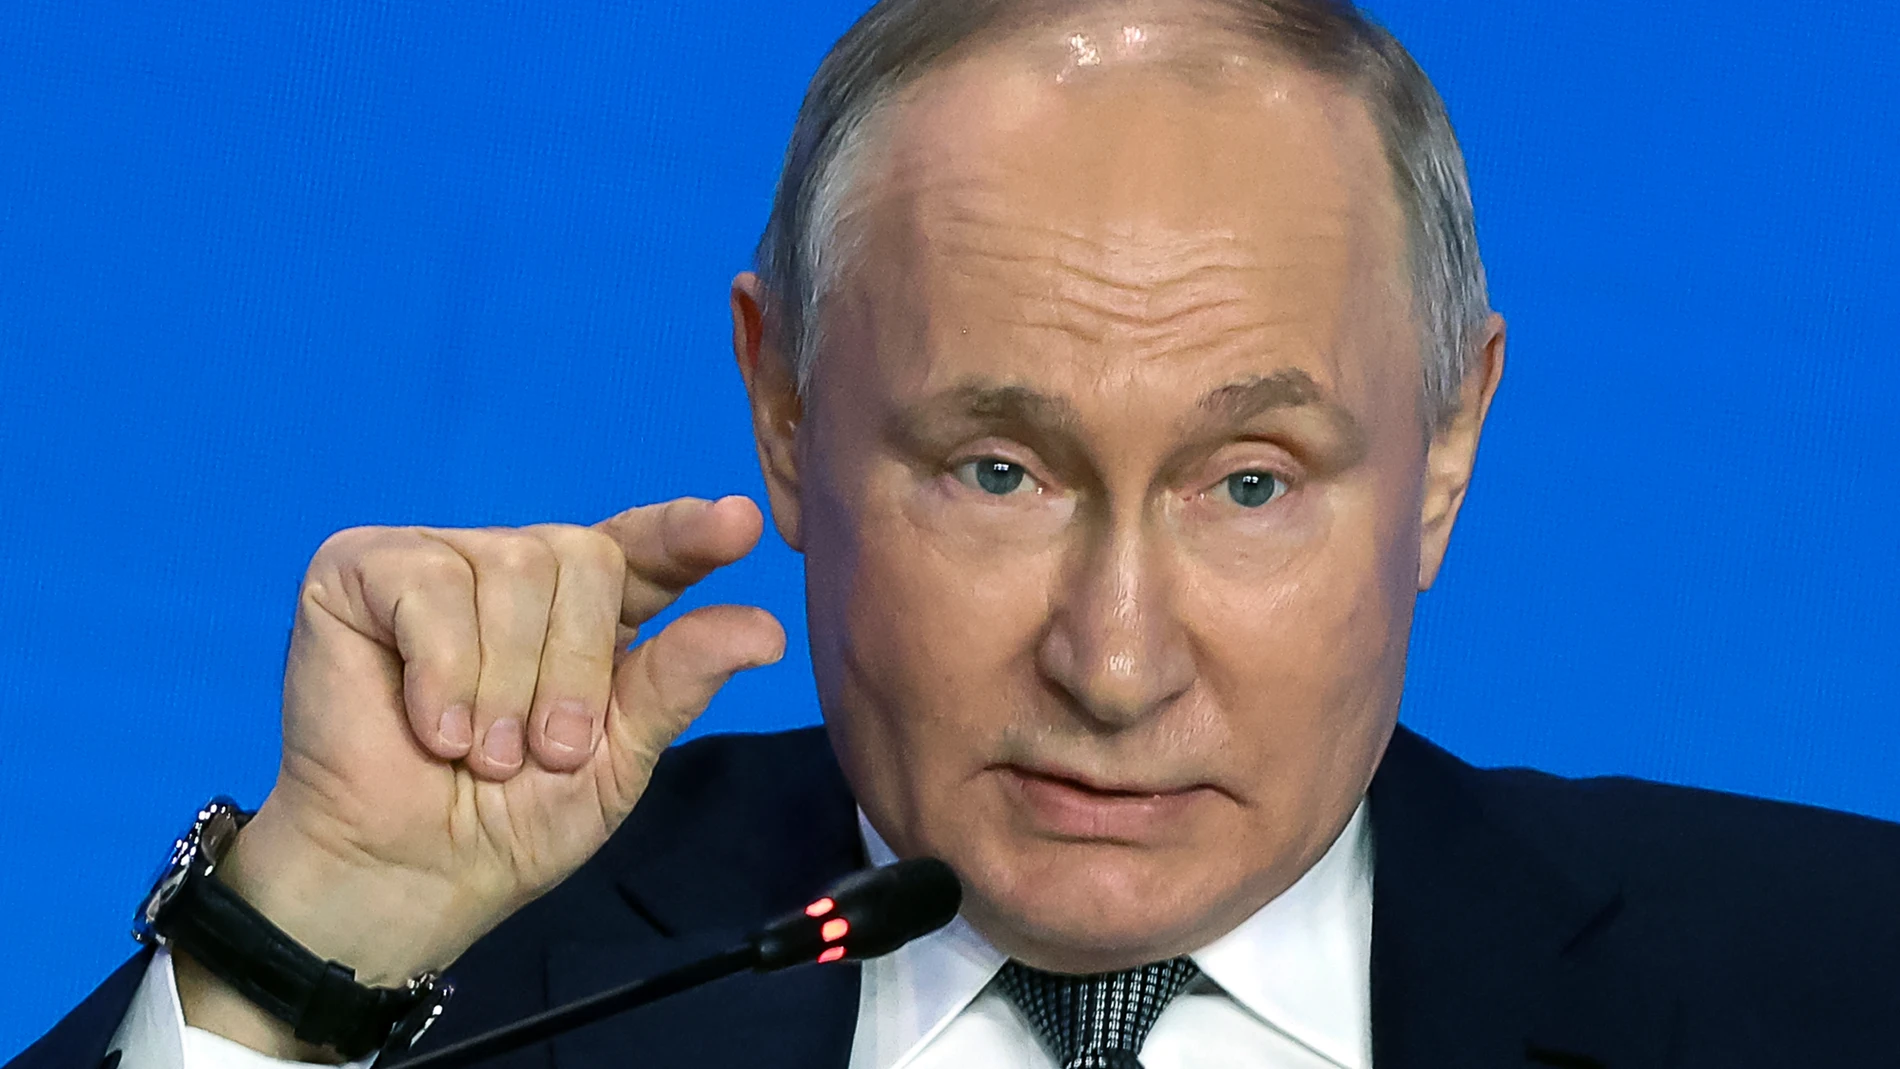 Russian President Vladimir Putin gestures as he speaks to scientists on the sidelines of the Future Technologies Forum at the World Trade Centre in Moscow, Russia, Wednesday, Feb. 14, 2024. (Sergei Karpukhin, Sputnik, Kremlin Pool Photo via AP)